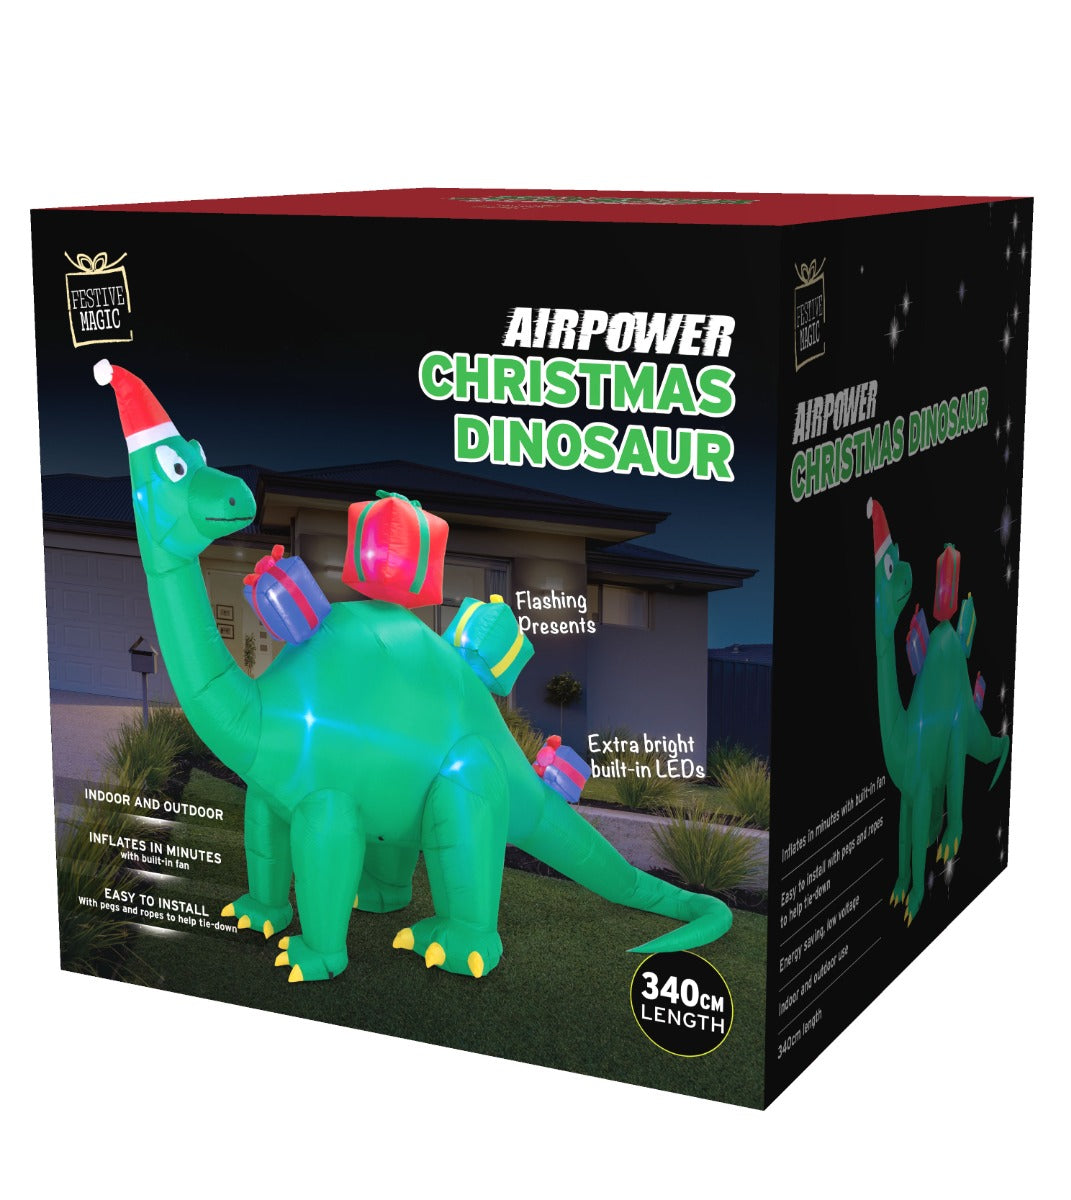 Stockholm Airpower Dino with 4 Presents Flashing Cool White LED 340 Cm